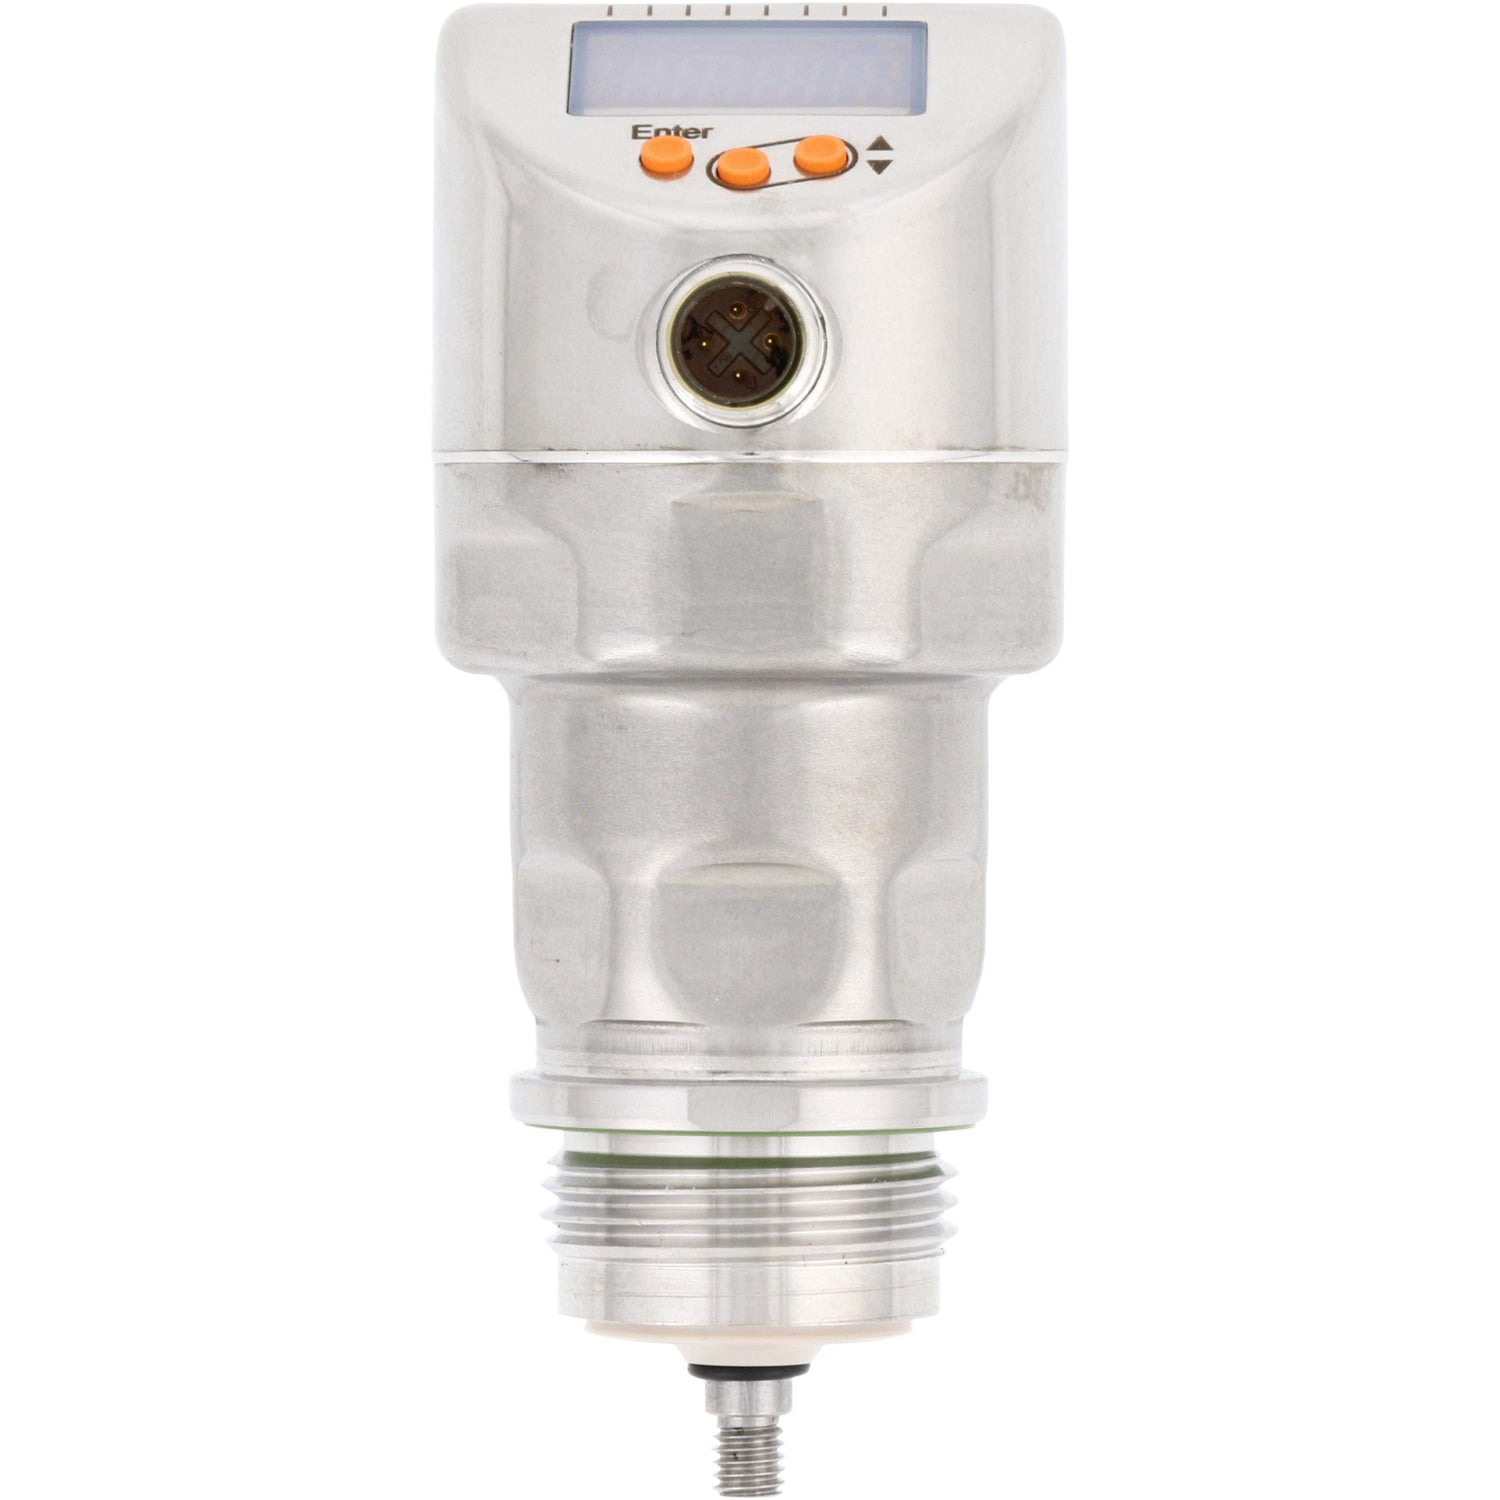 Continuous level sensor with three orange push buttons and a threaded end shown on white background. 